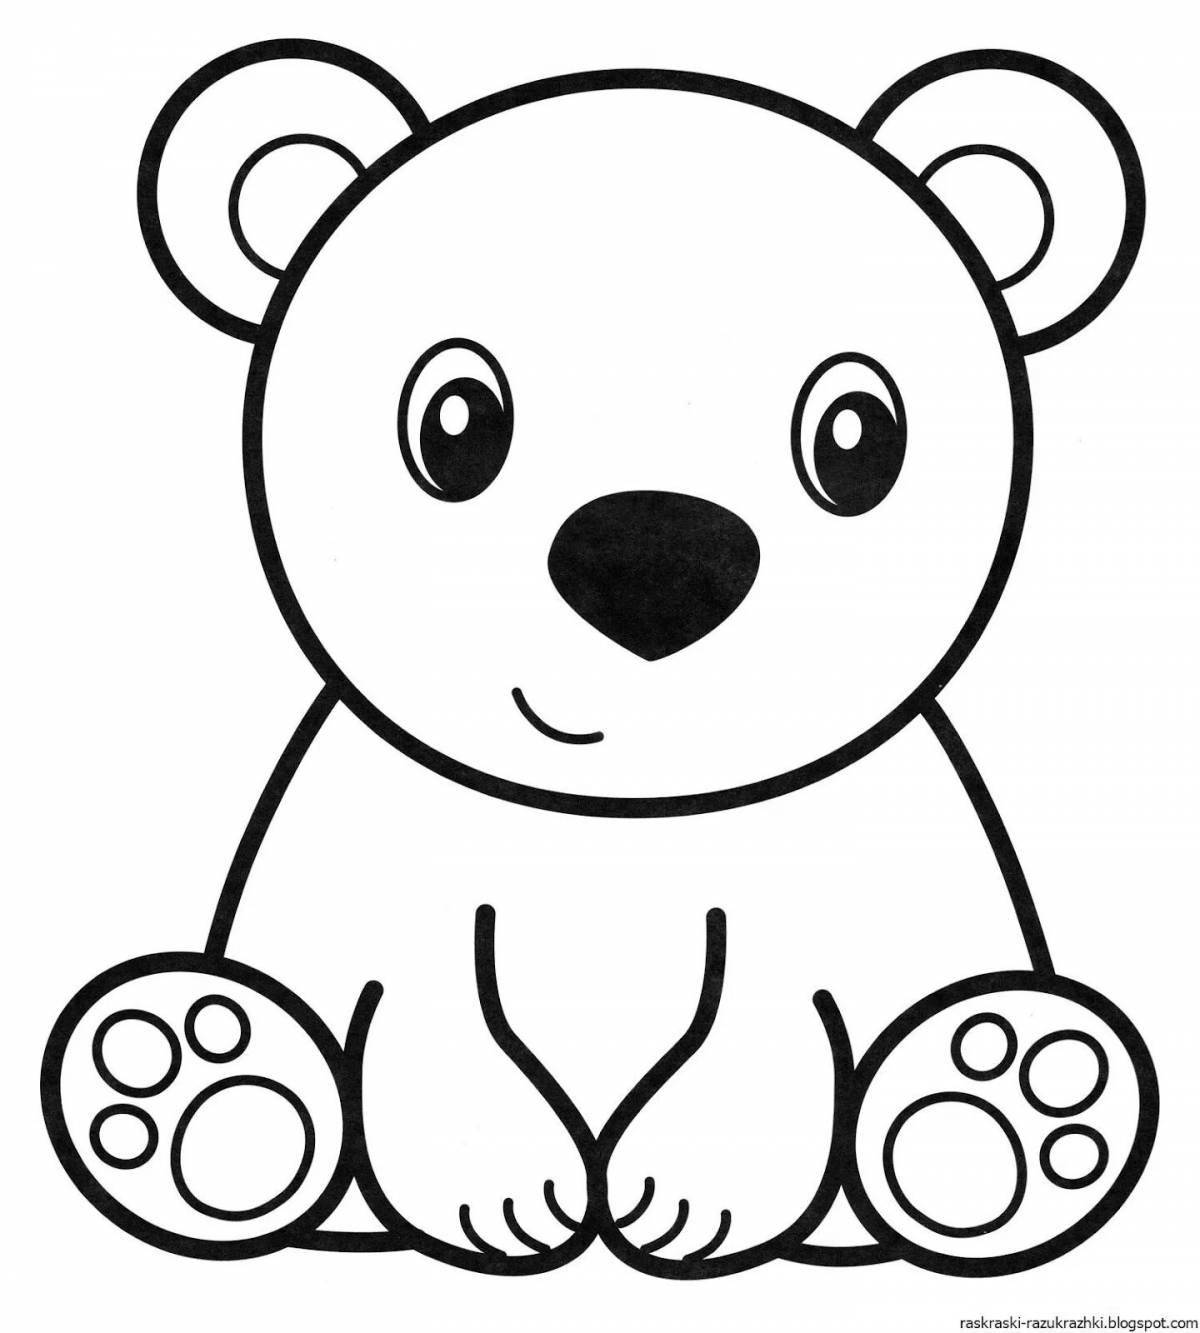 Coloring book inquisitive teddy bear for kids